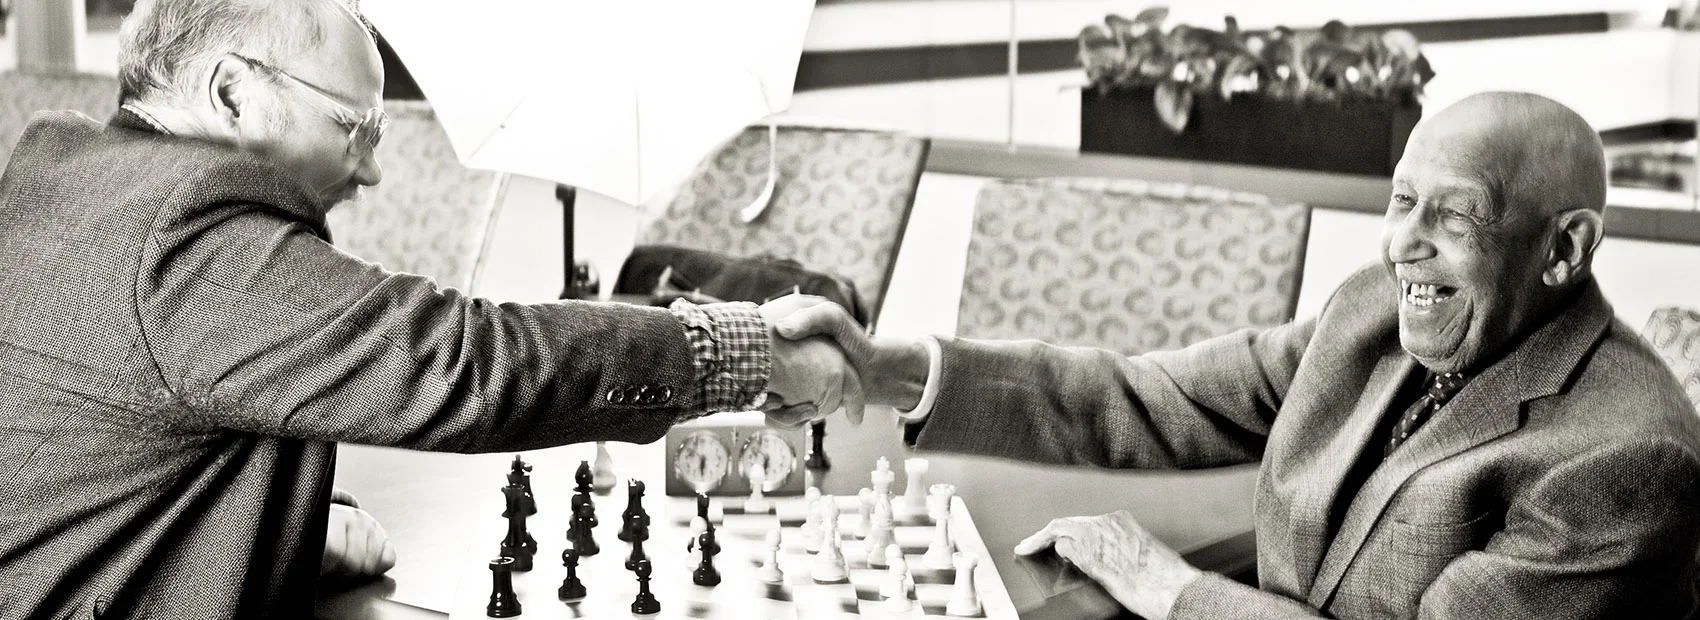 US Chess Mission and Vision